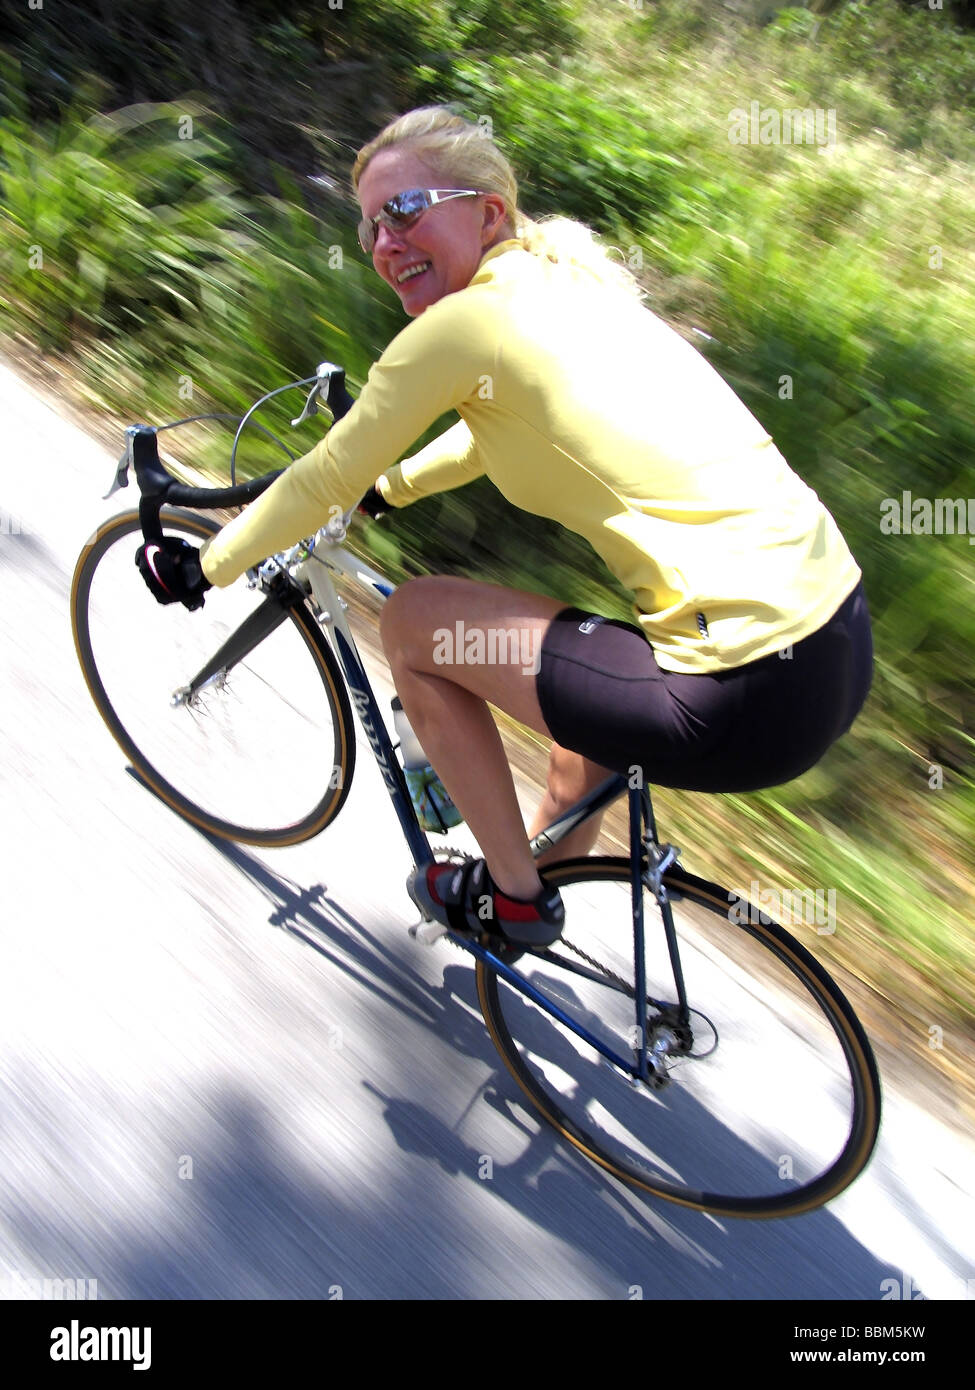 Female Cyclist riding racing bicycle. Stock Photo